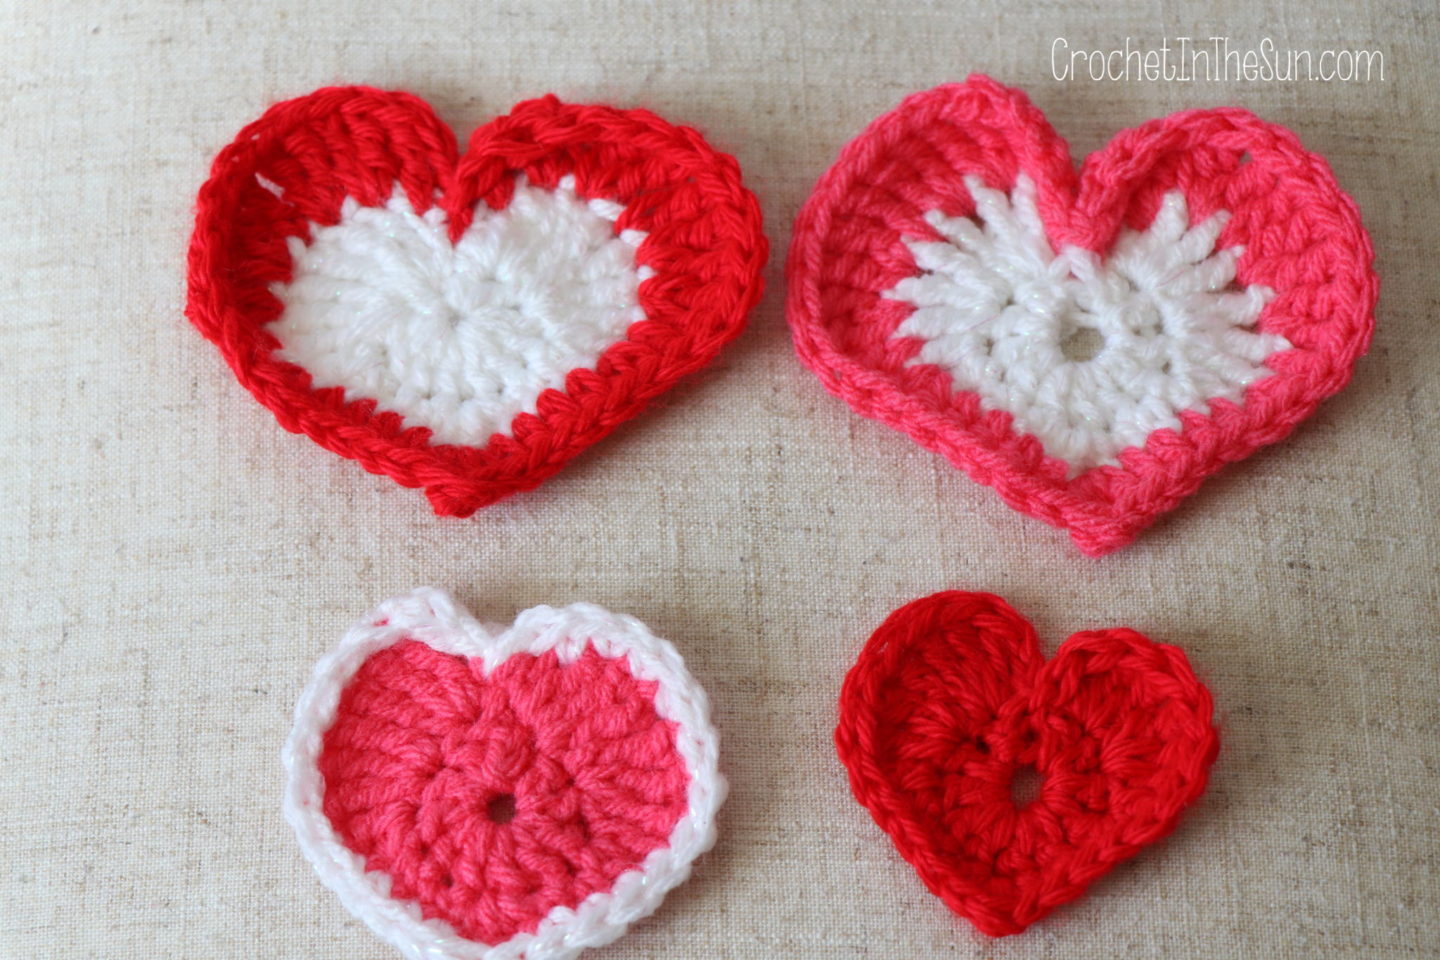 How to crochet a hearts with a border. A beginner's guide to crocheting hearts. #crochet #crochettutorials